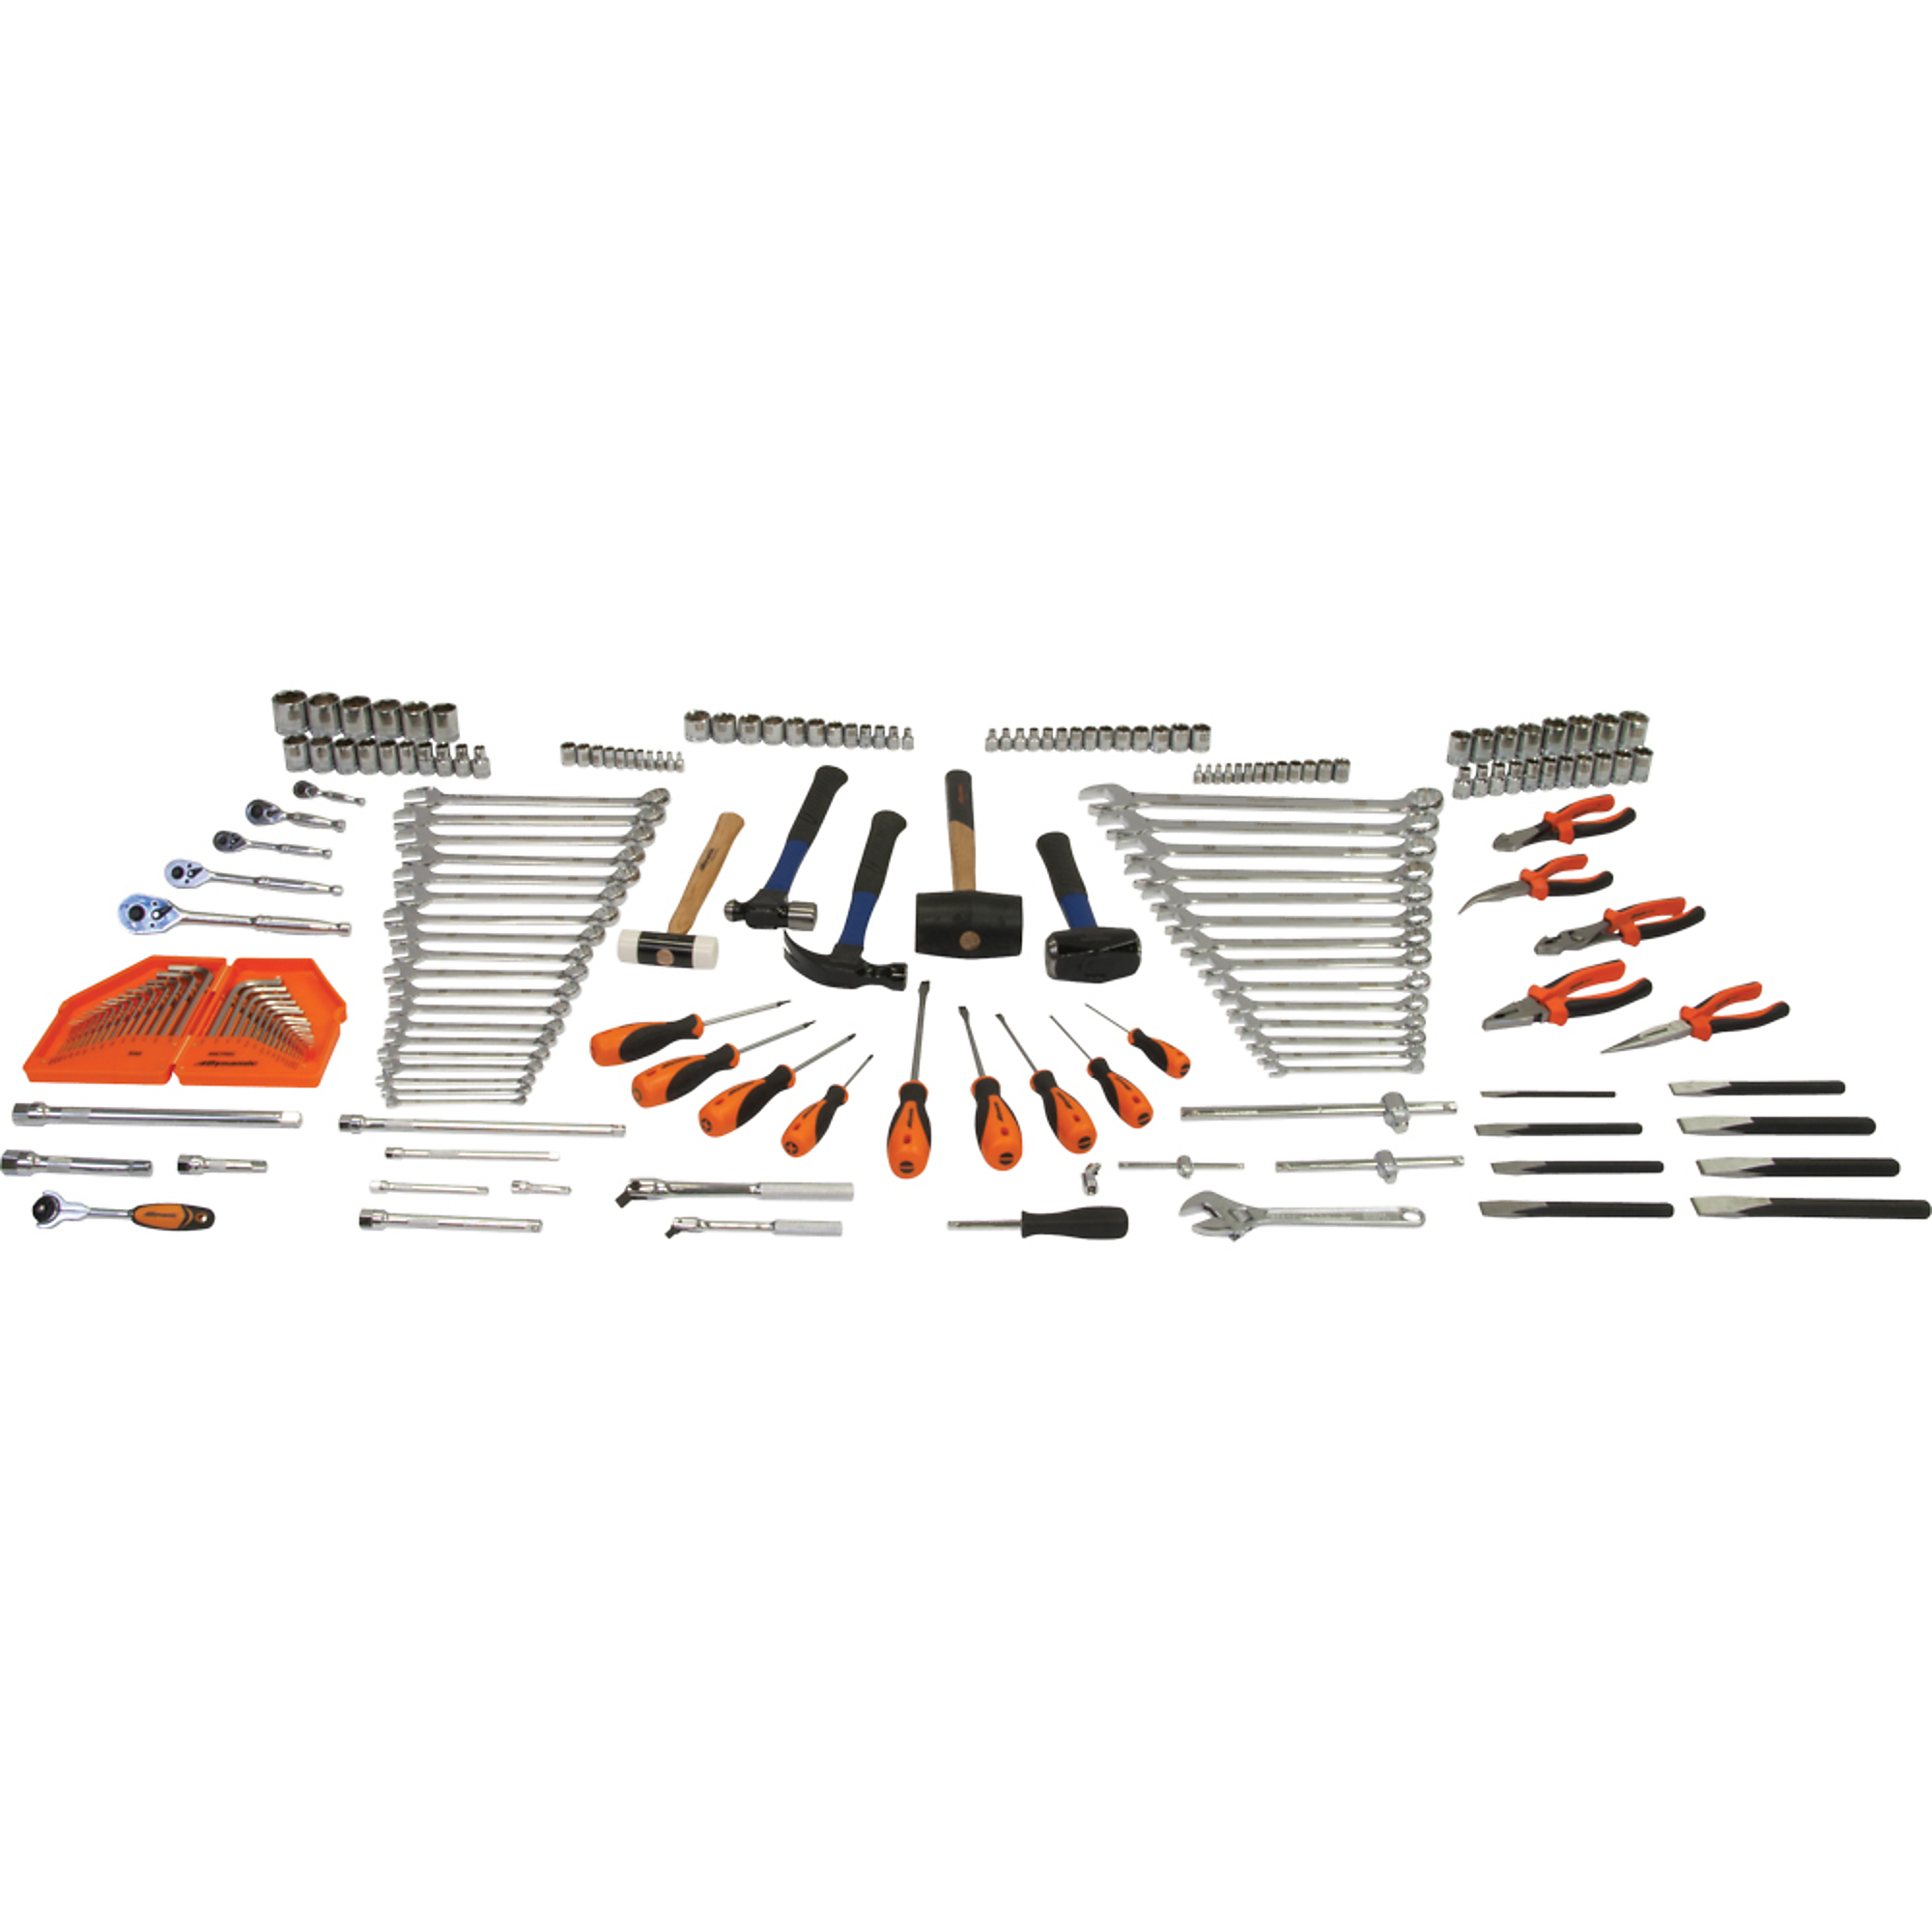 198 Piece Starter Master Set, Pieces (qty.) 198 Model - Dynamic Tools D096003